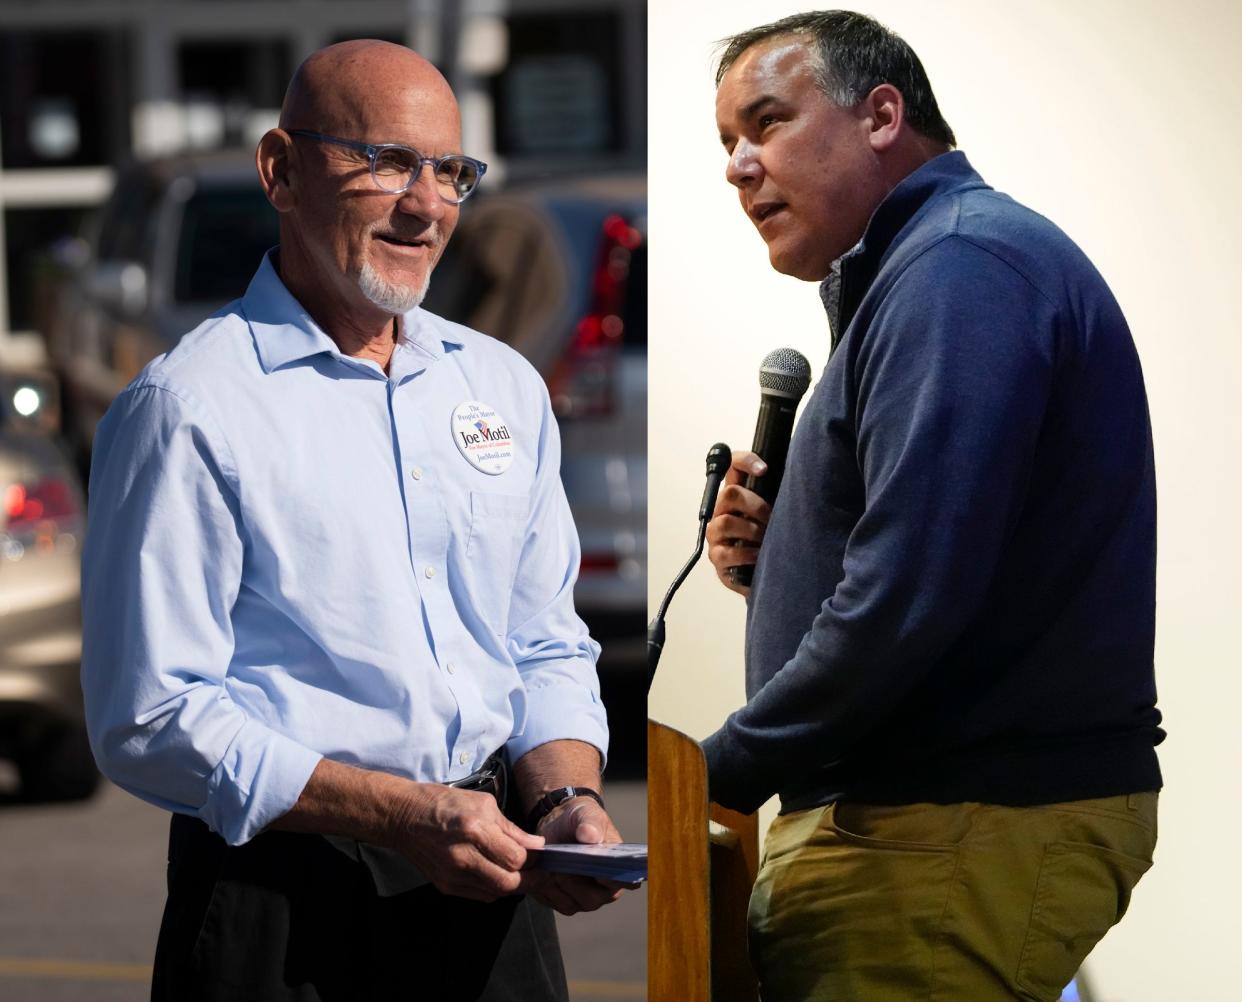 Joe Motil, left, is running against incumbent Columbus Mayor Andrew Ginther, right, in the 2023 fall election.